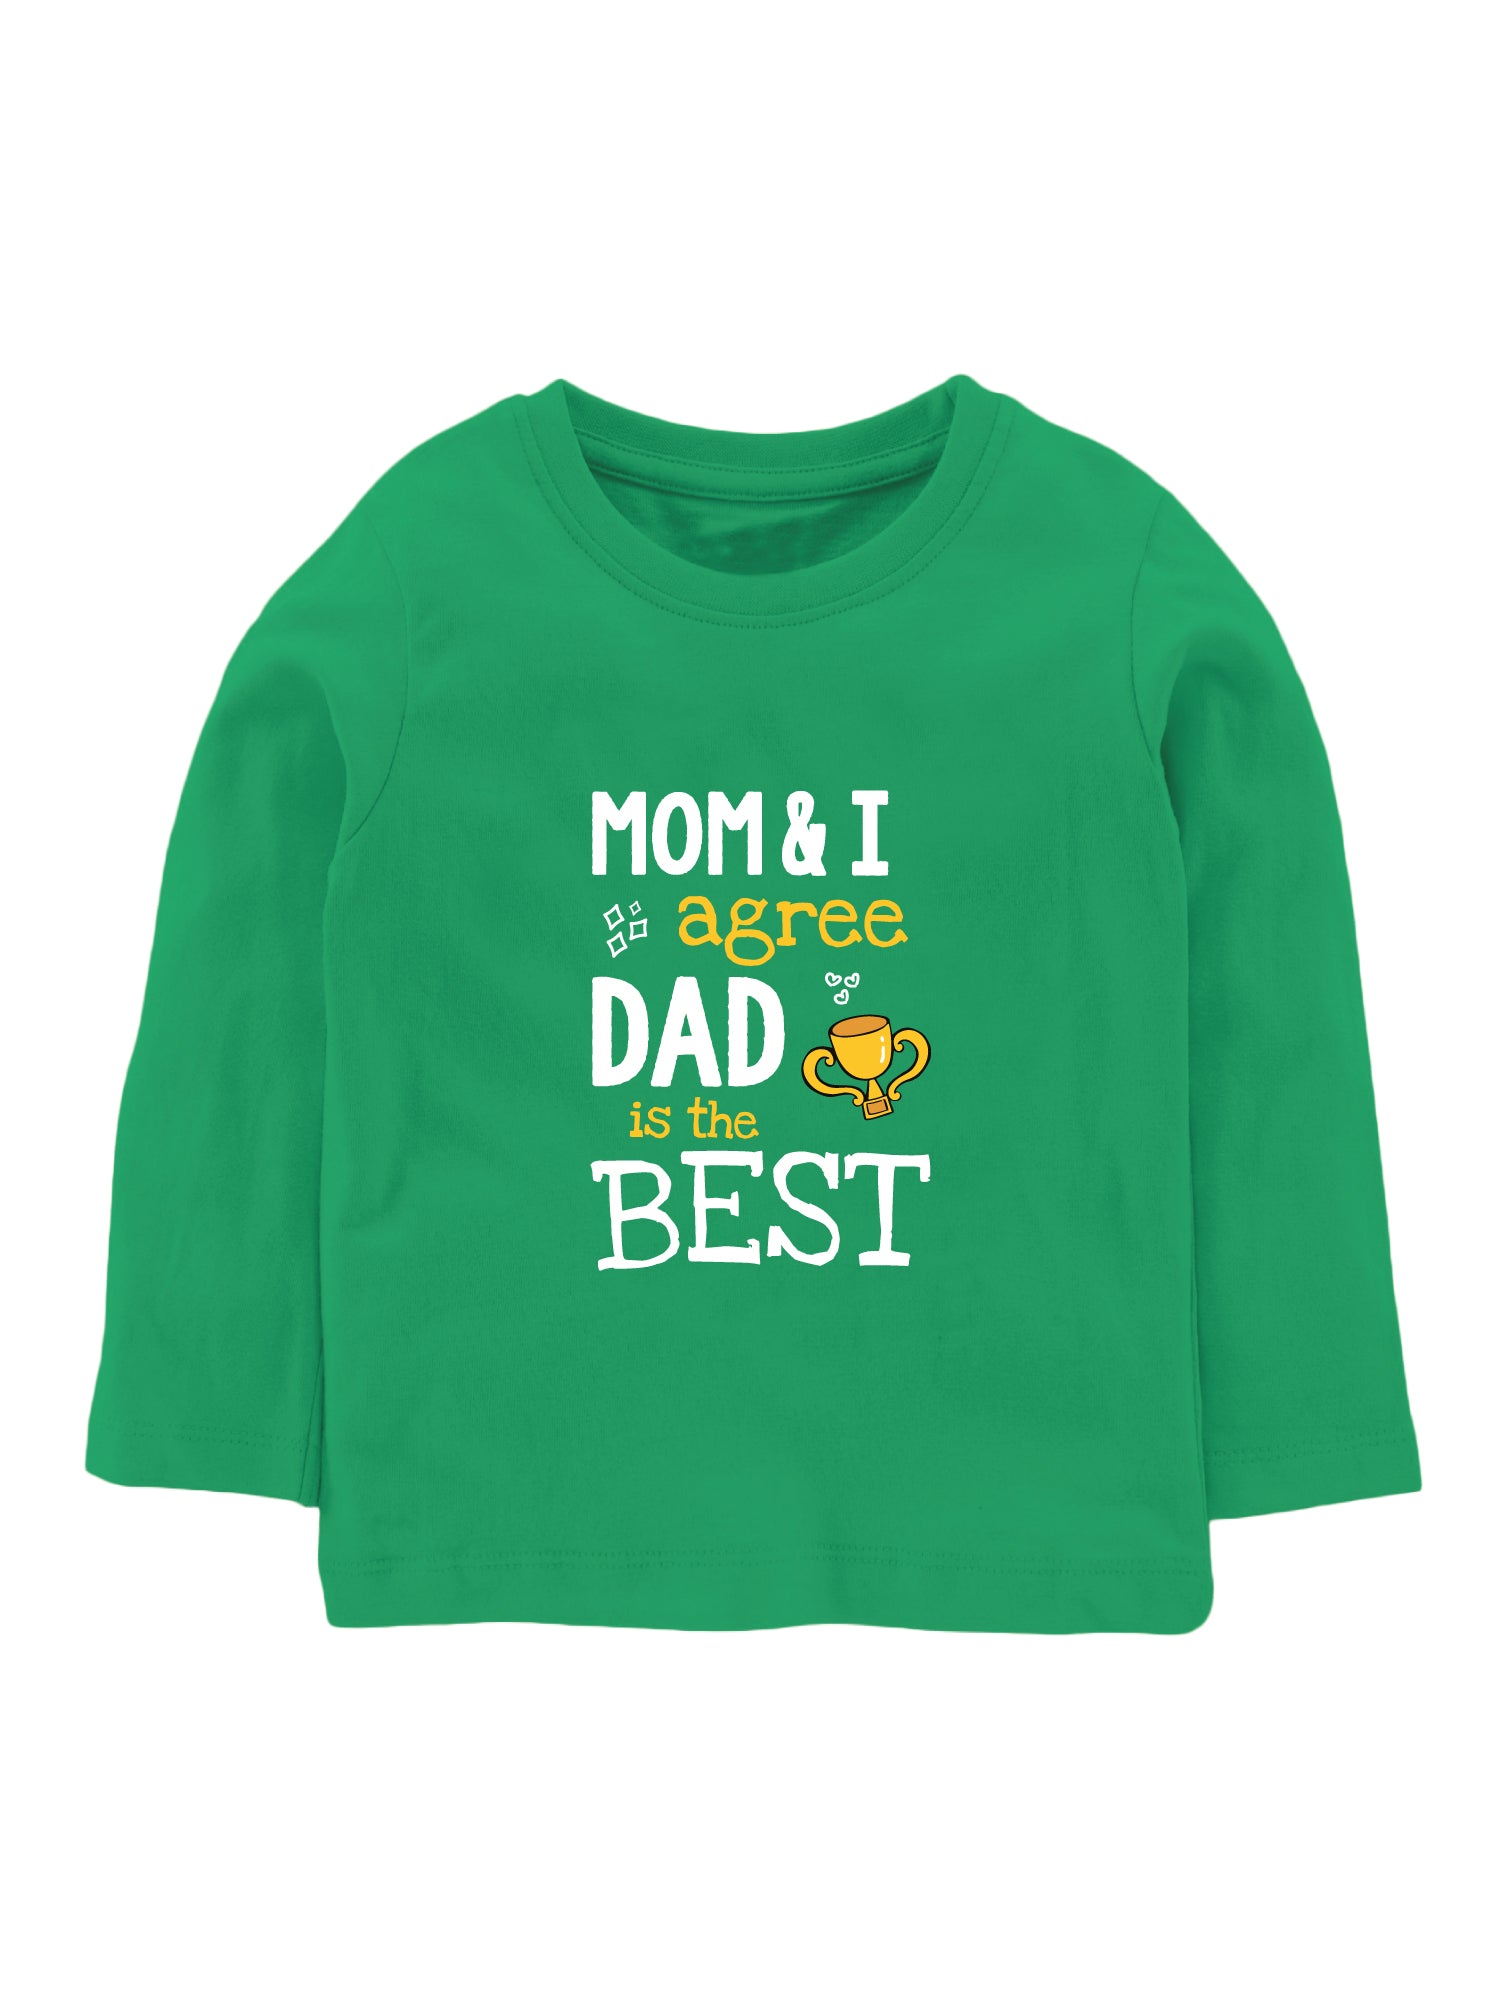 MOM & I Agree Dad is the Best - Tee